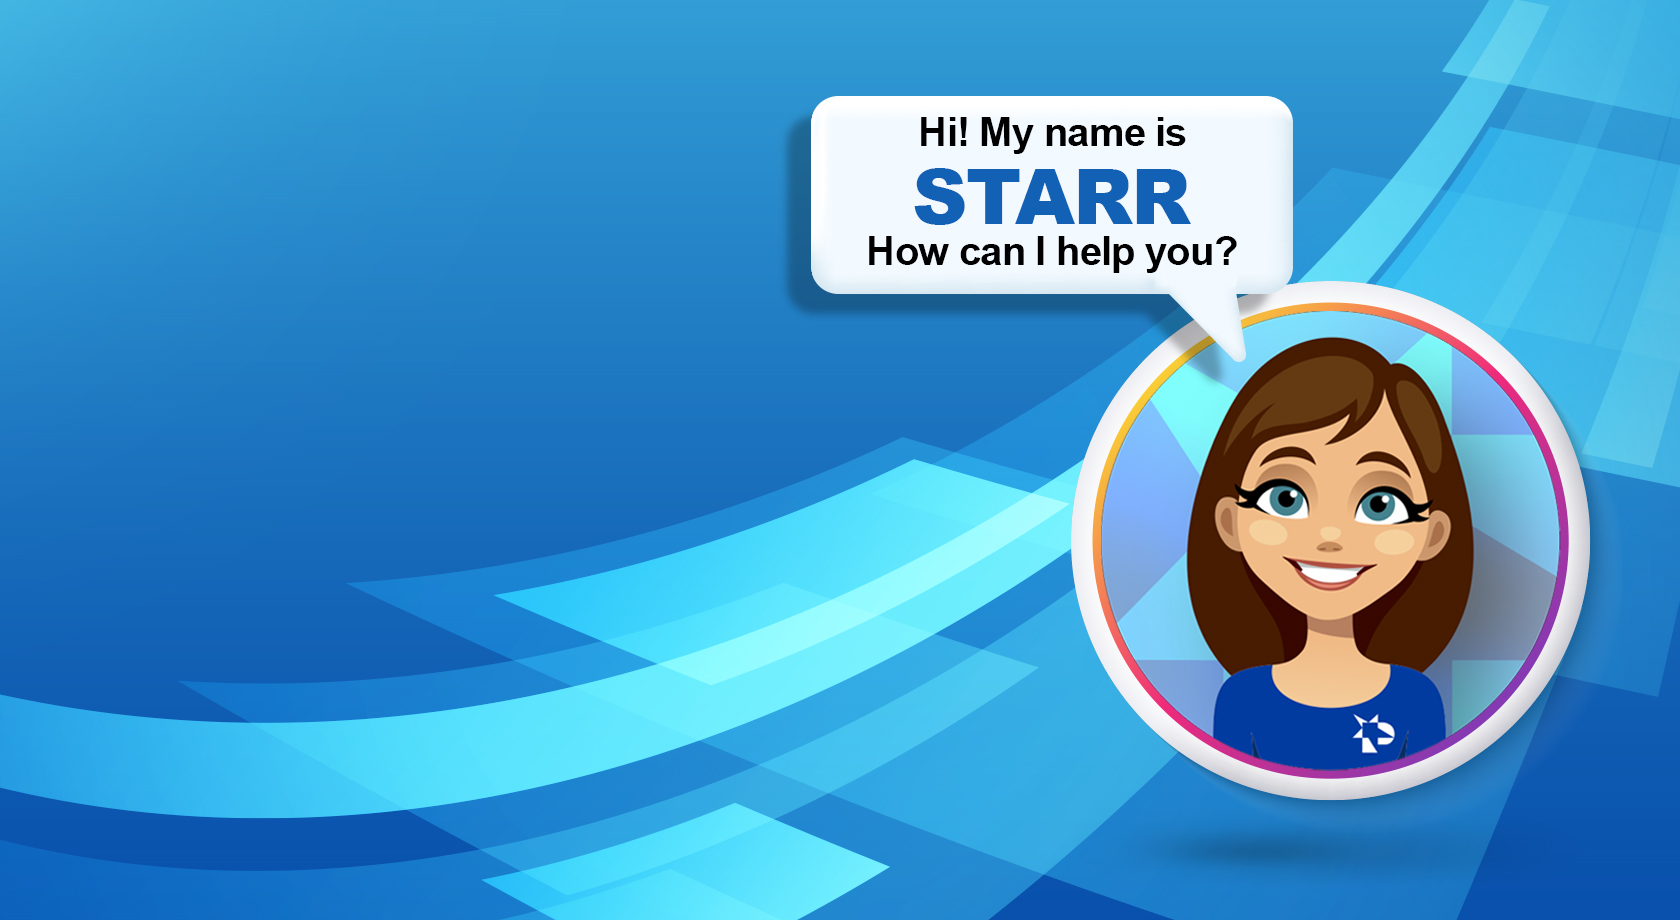 Hi! My name is STARR. How can I help you?